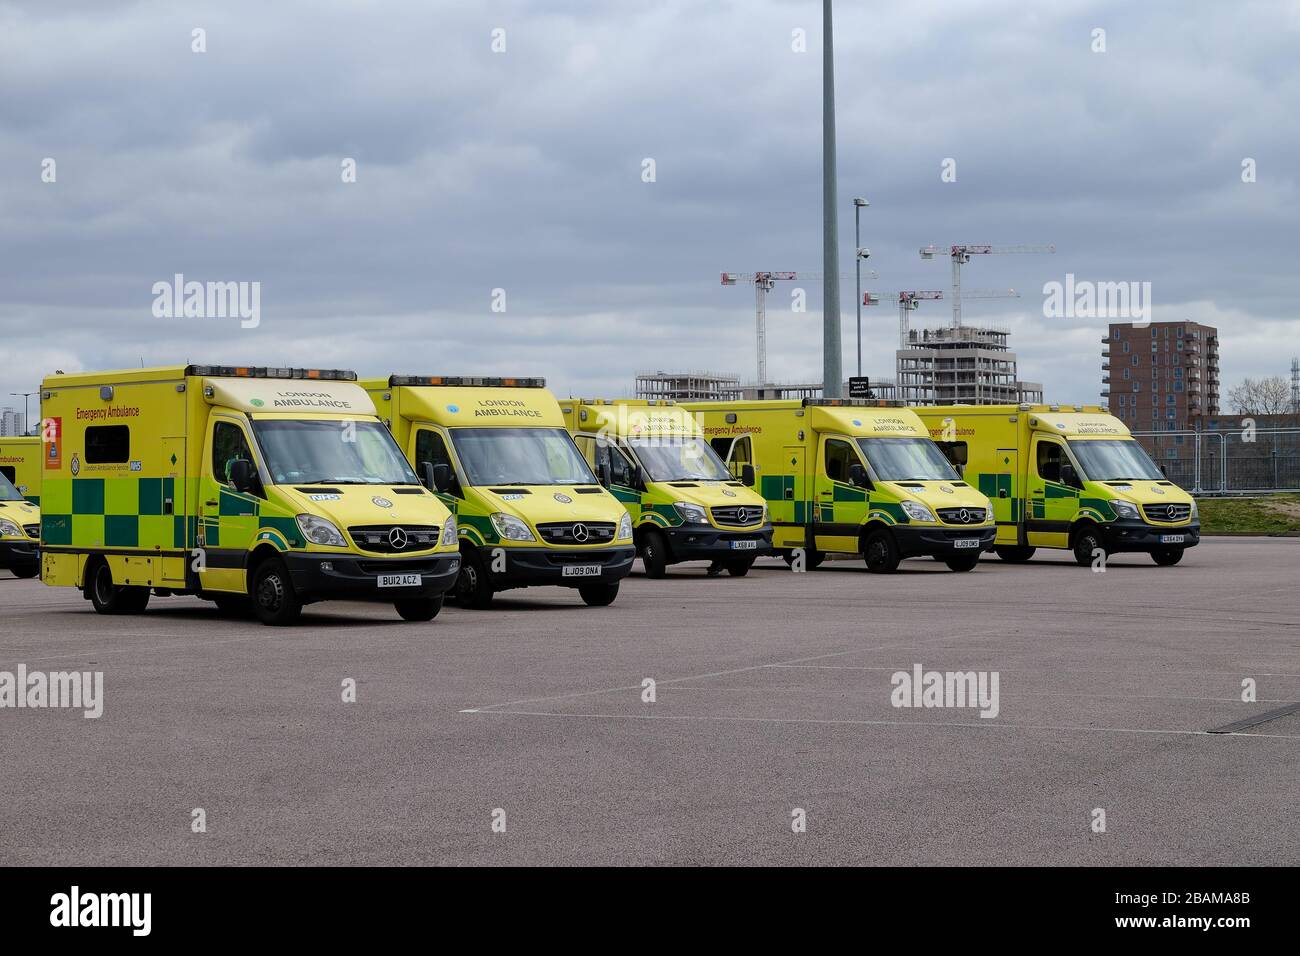 London, UK. 28th March 2020. London UK ExCel Centre prepares to treat Covid-19 patients 'within days’. Now renamed NHS Nightingale to fight the UK’s coronavirus battle Credit: Michelle Sadgrove/Alamy Live News Stock Photo